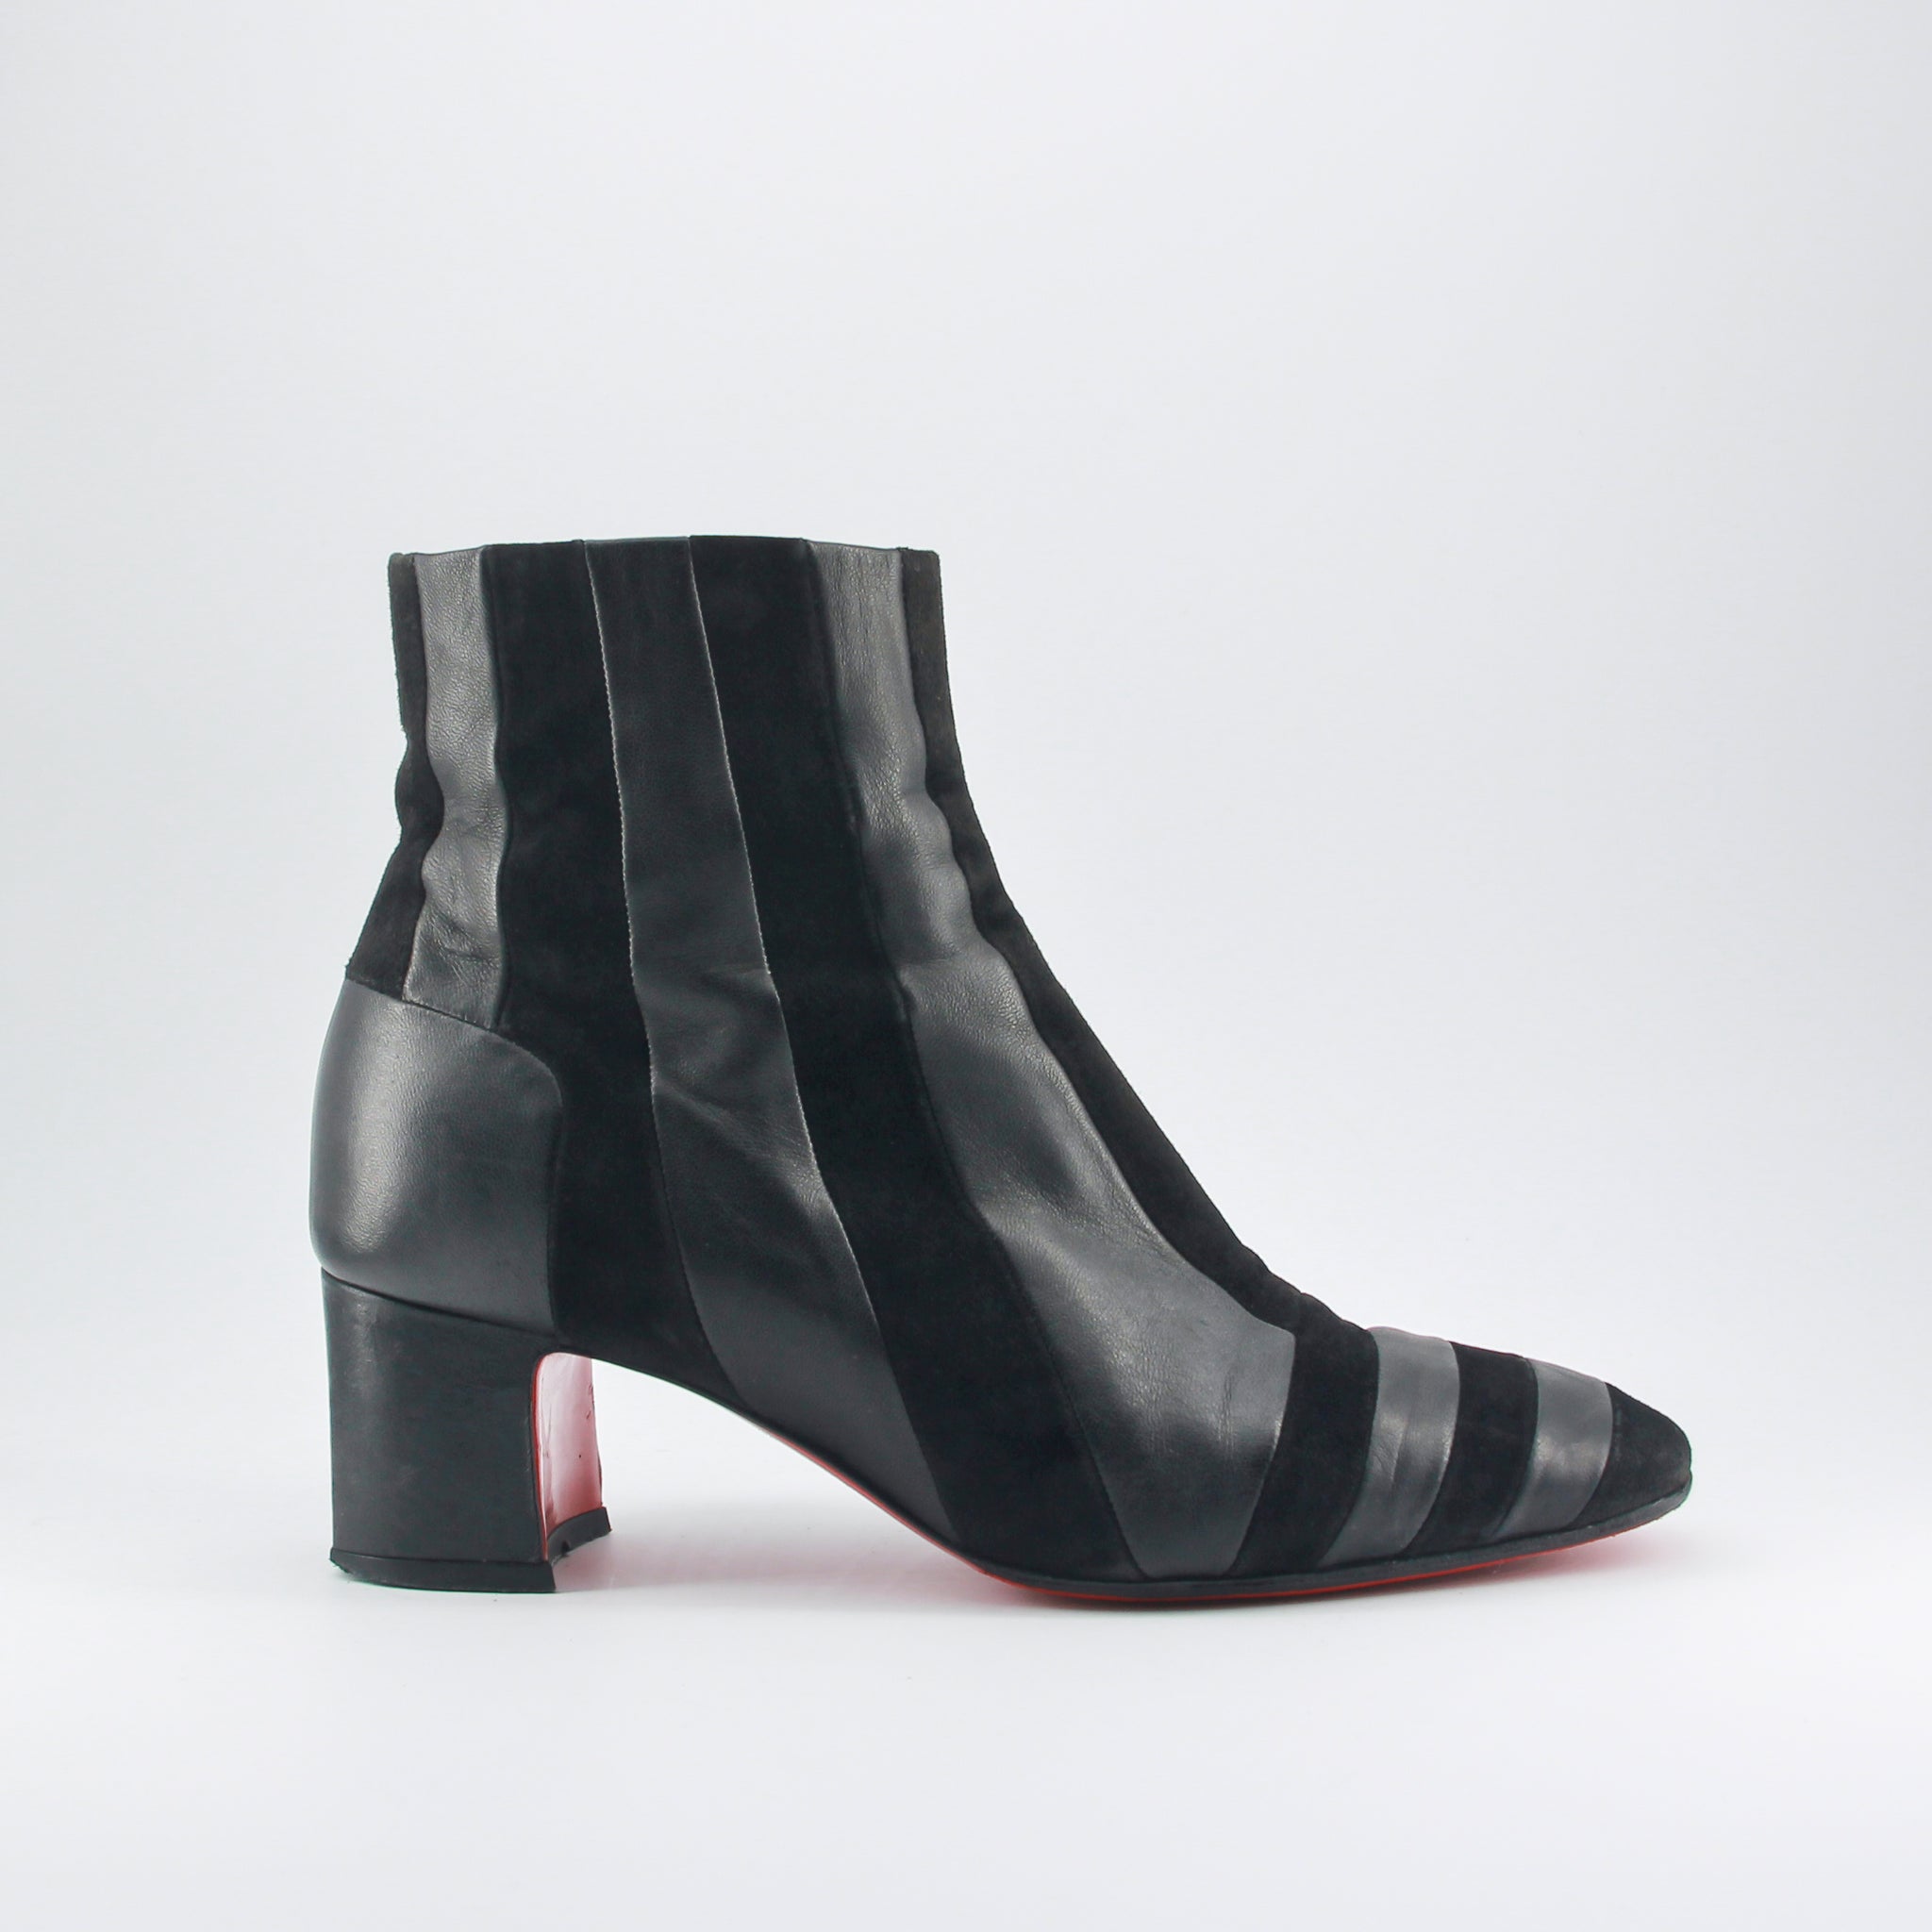 bottines ankle boots CHRISTIAN LOUBOUTIN noir black cuir leather suede the tiger twist house of bichonnage chaussure de luxe luxury shoes seconde main second hand rénovée renovated cordonnerie repair annecy 